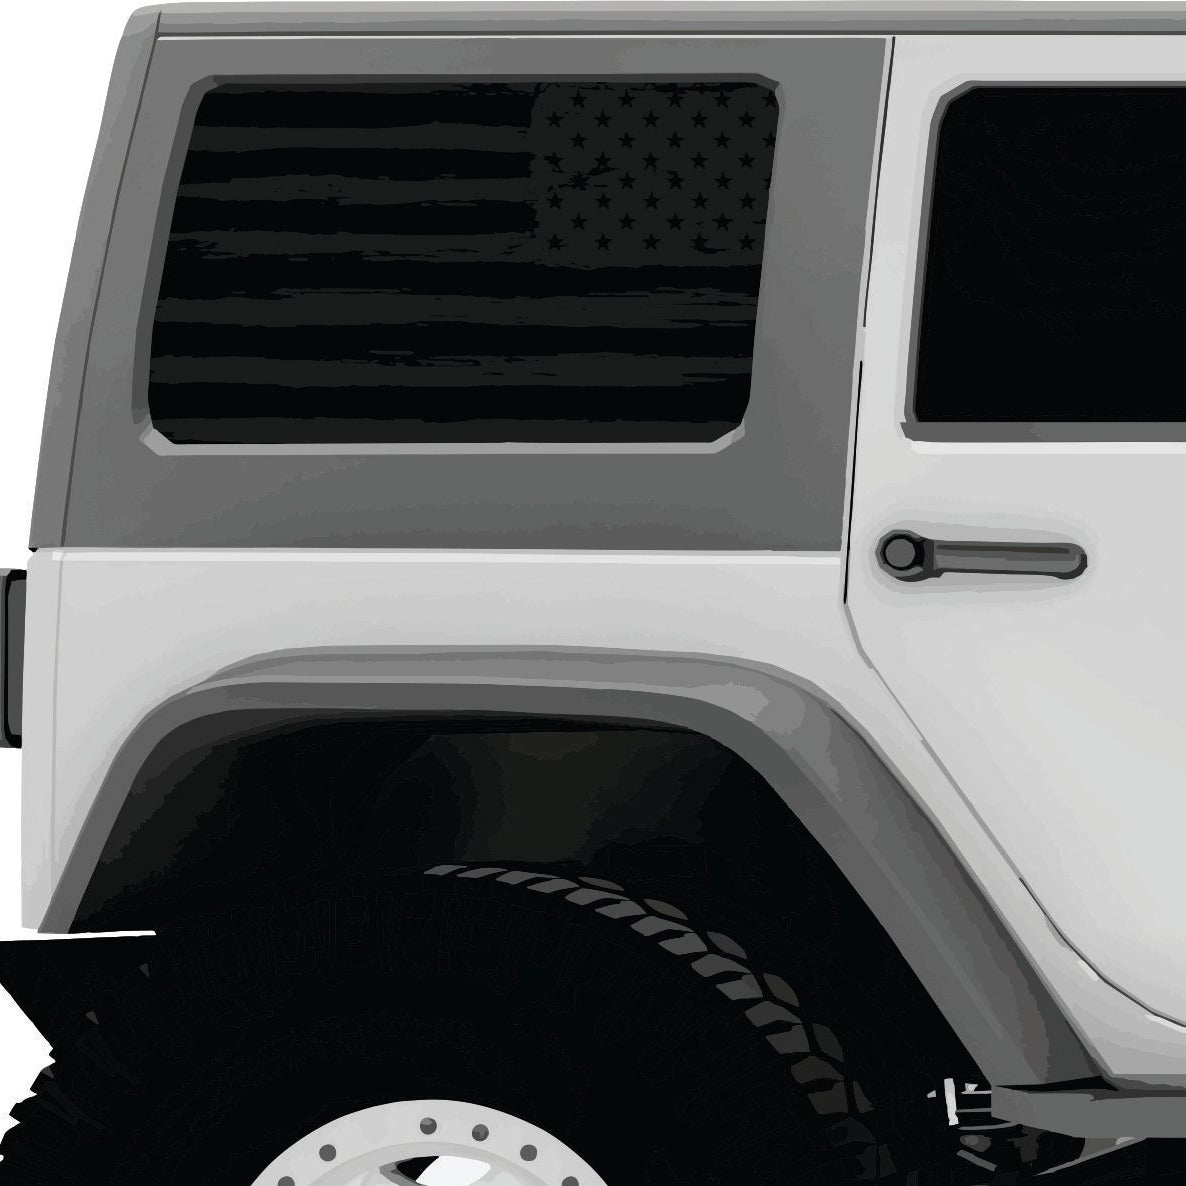 Rustic dark gray American flag decal window cling on a white Jeep Wrangler's back window.